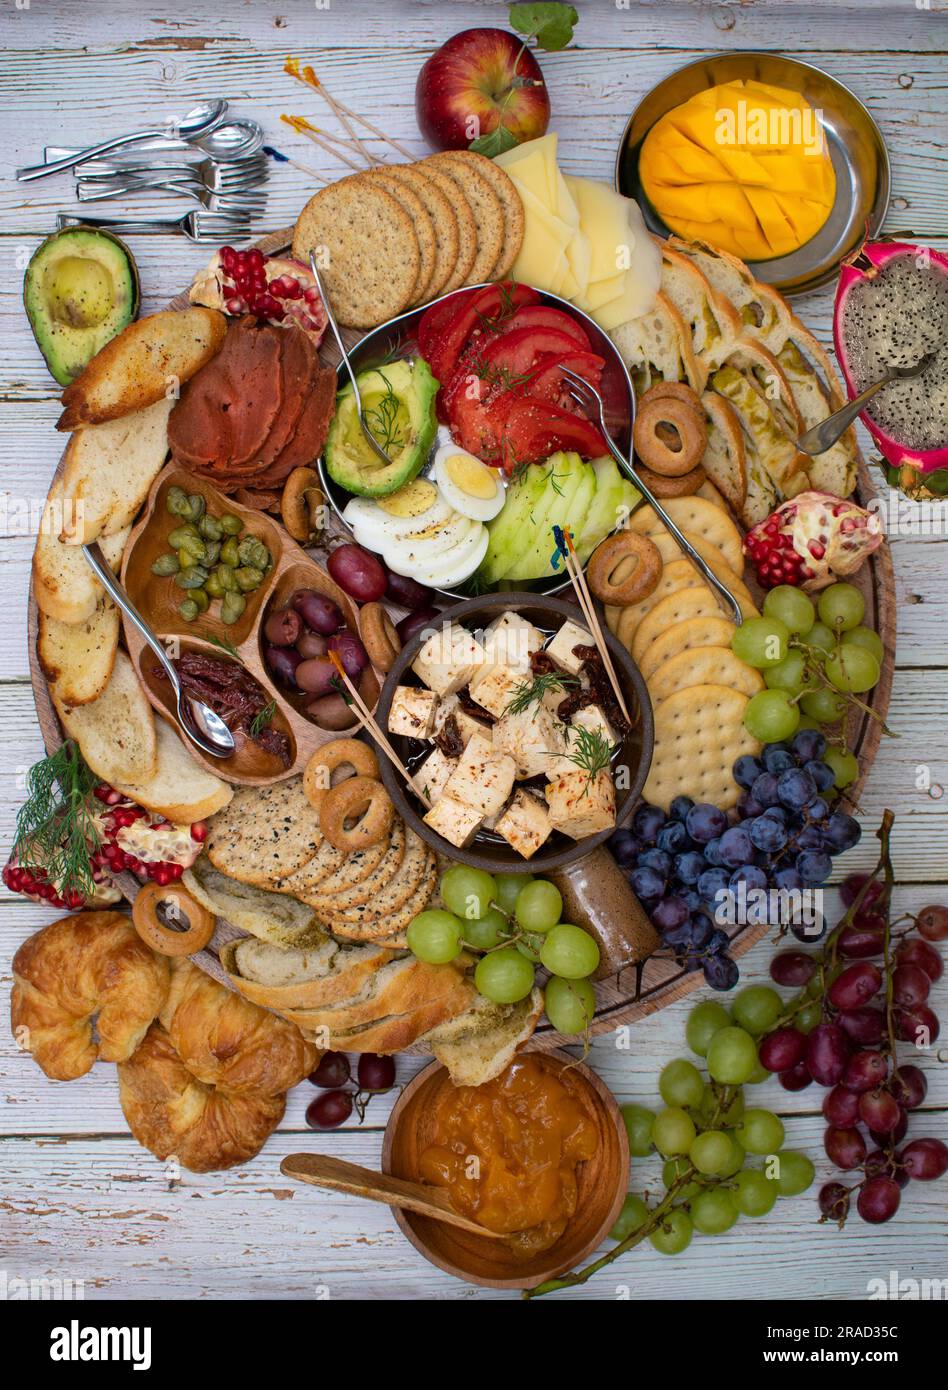 Appetizer board with crackers, cheese, vegetables and grapes Stock Photo